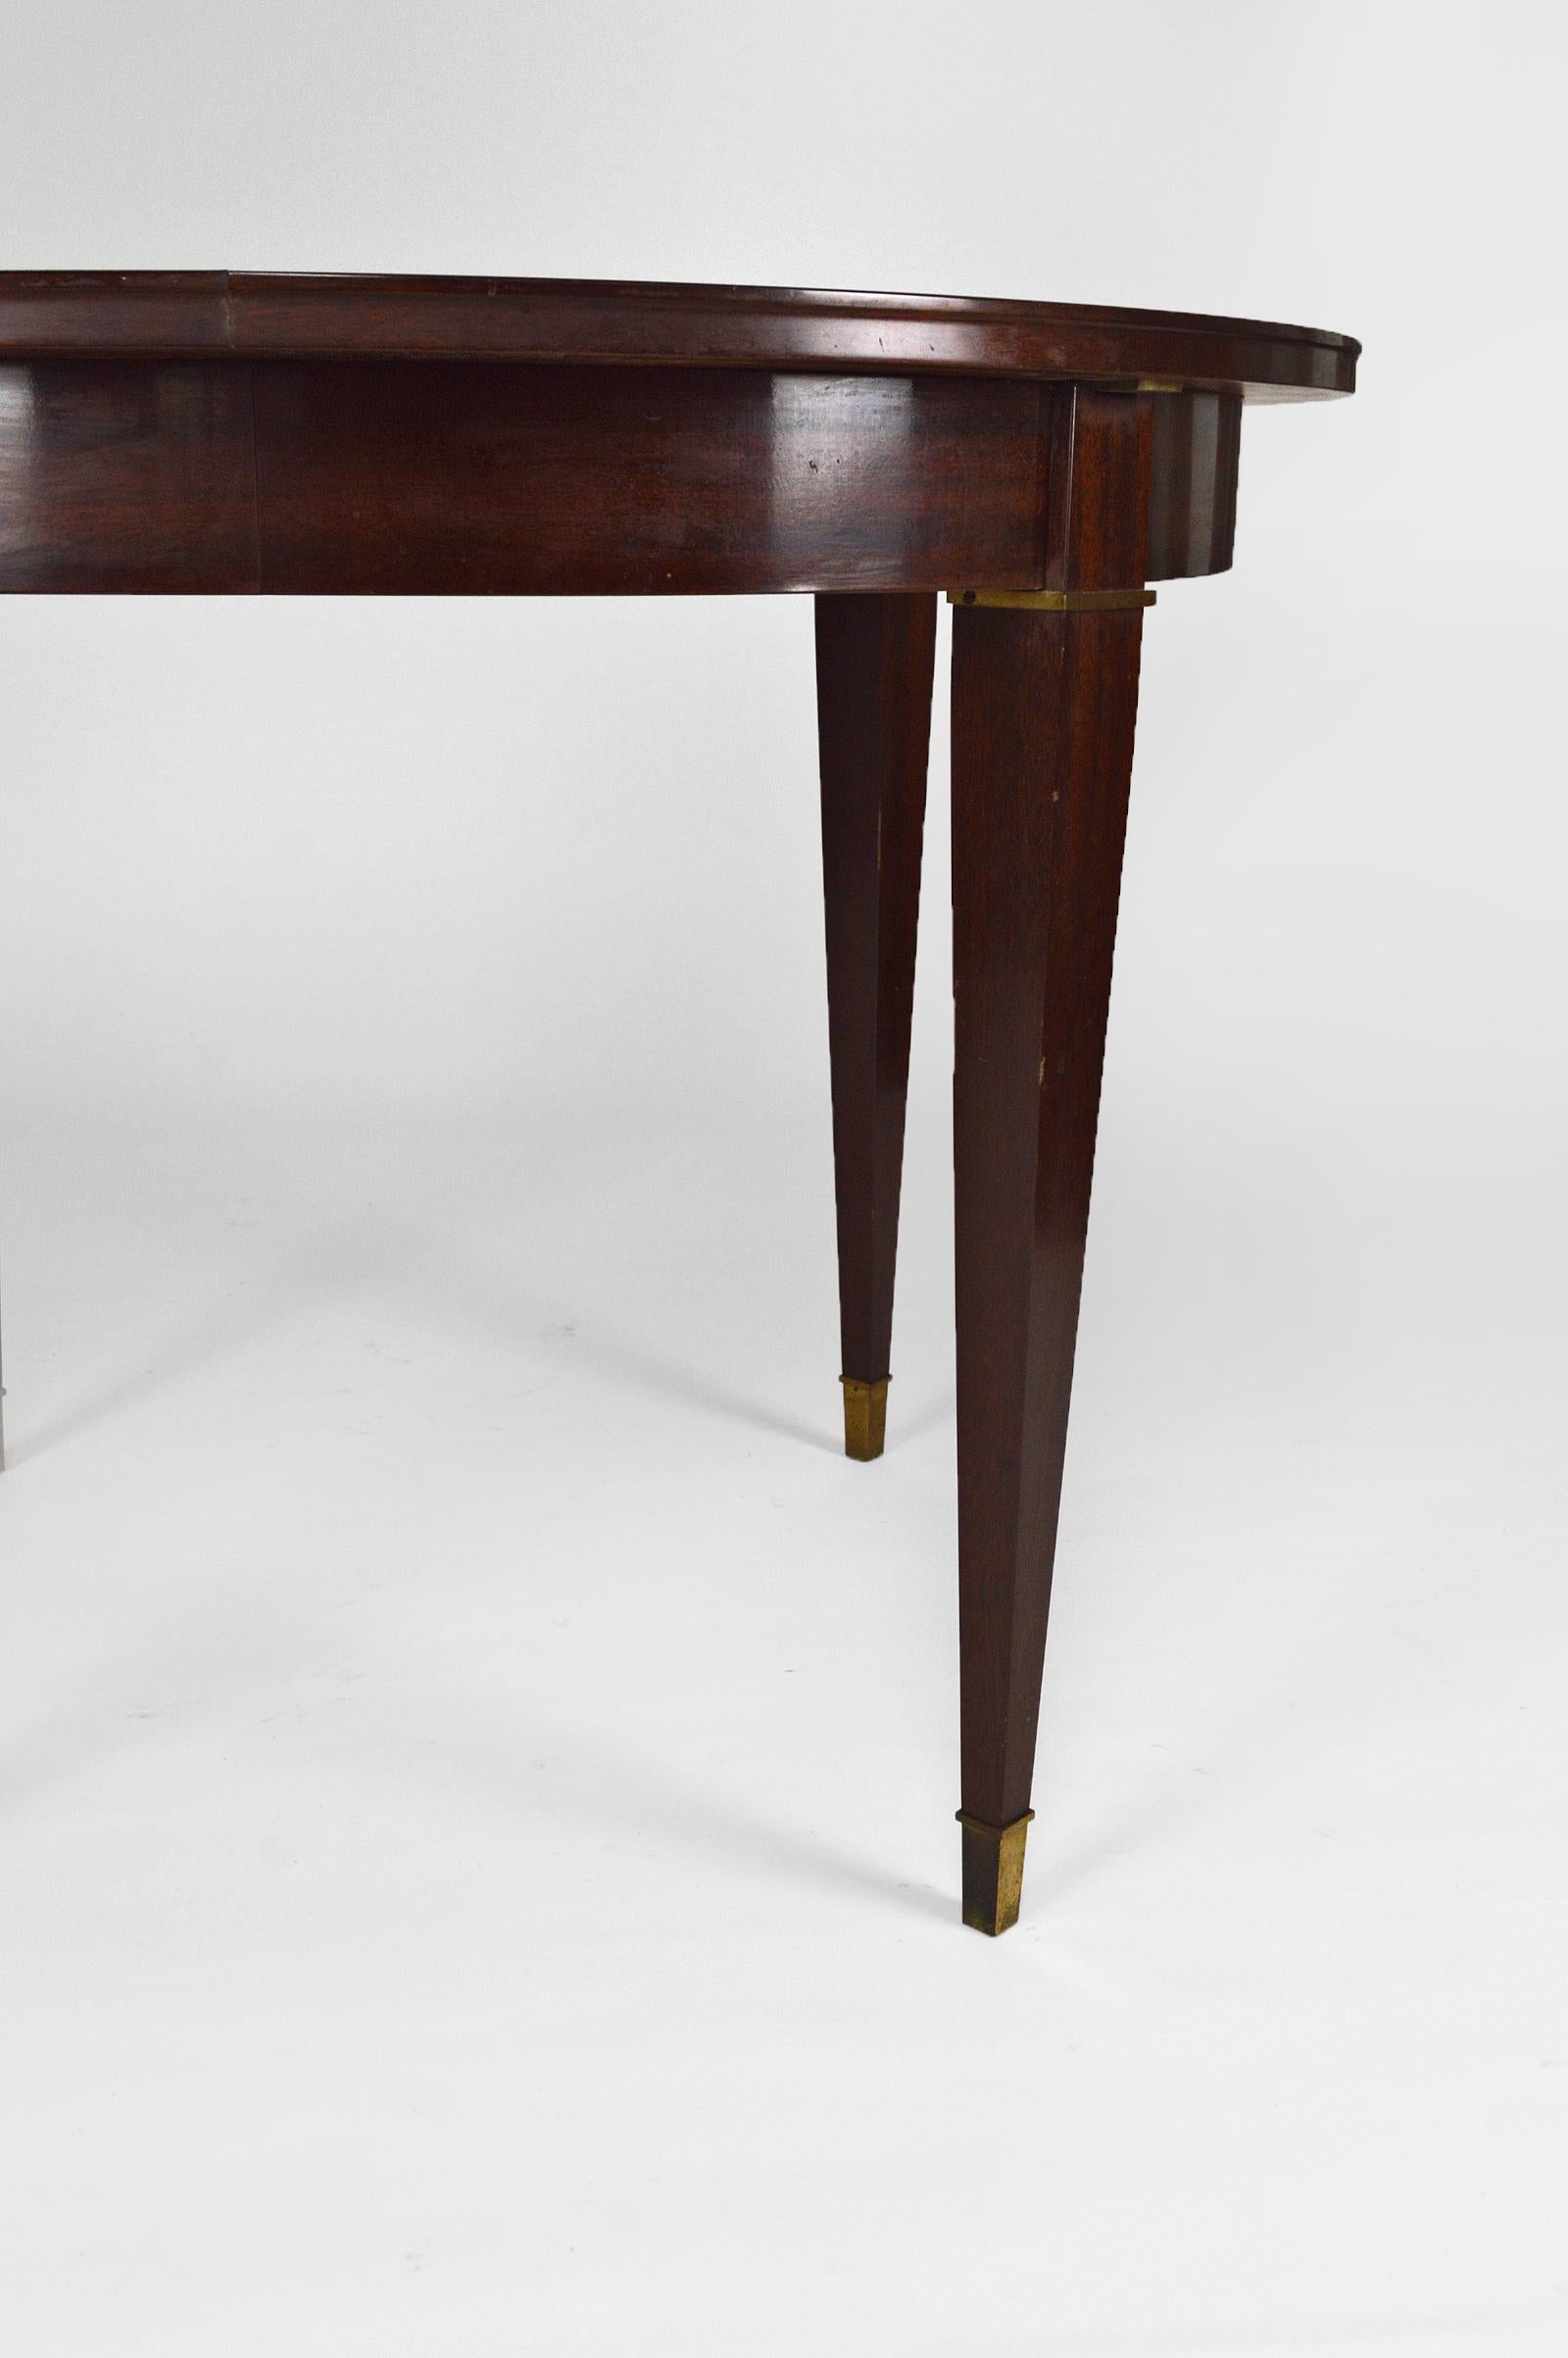 Wood Art Deco Mahogany Round Table with Extensions, by Jacques Adnet, circa 1940 For Sale